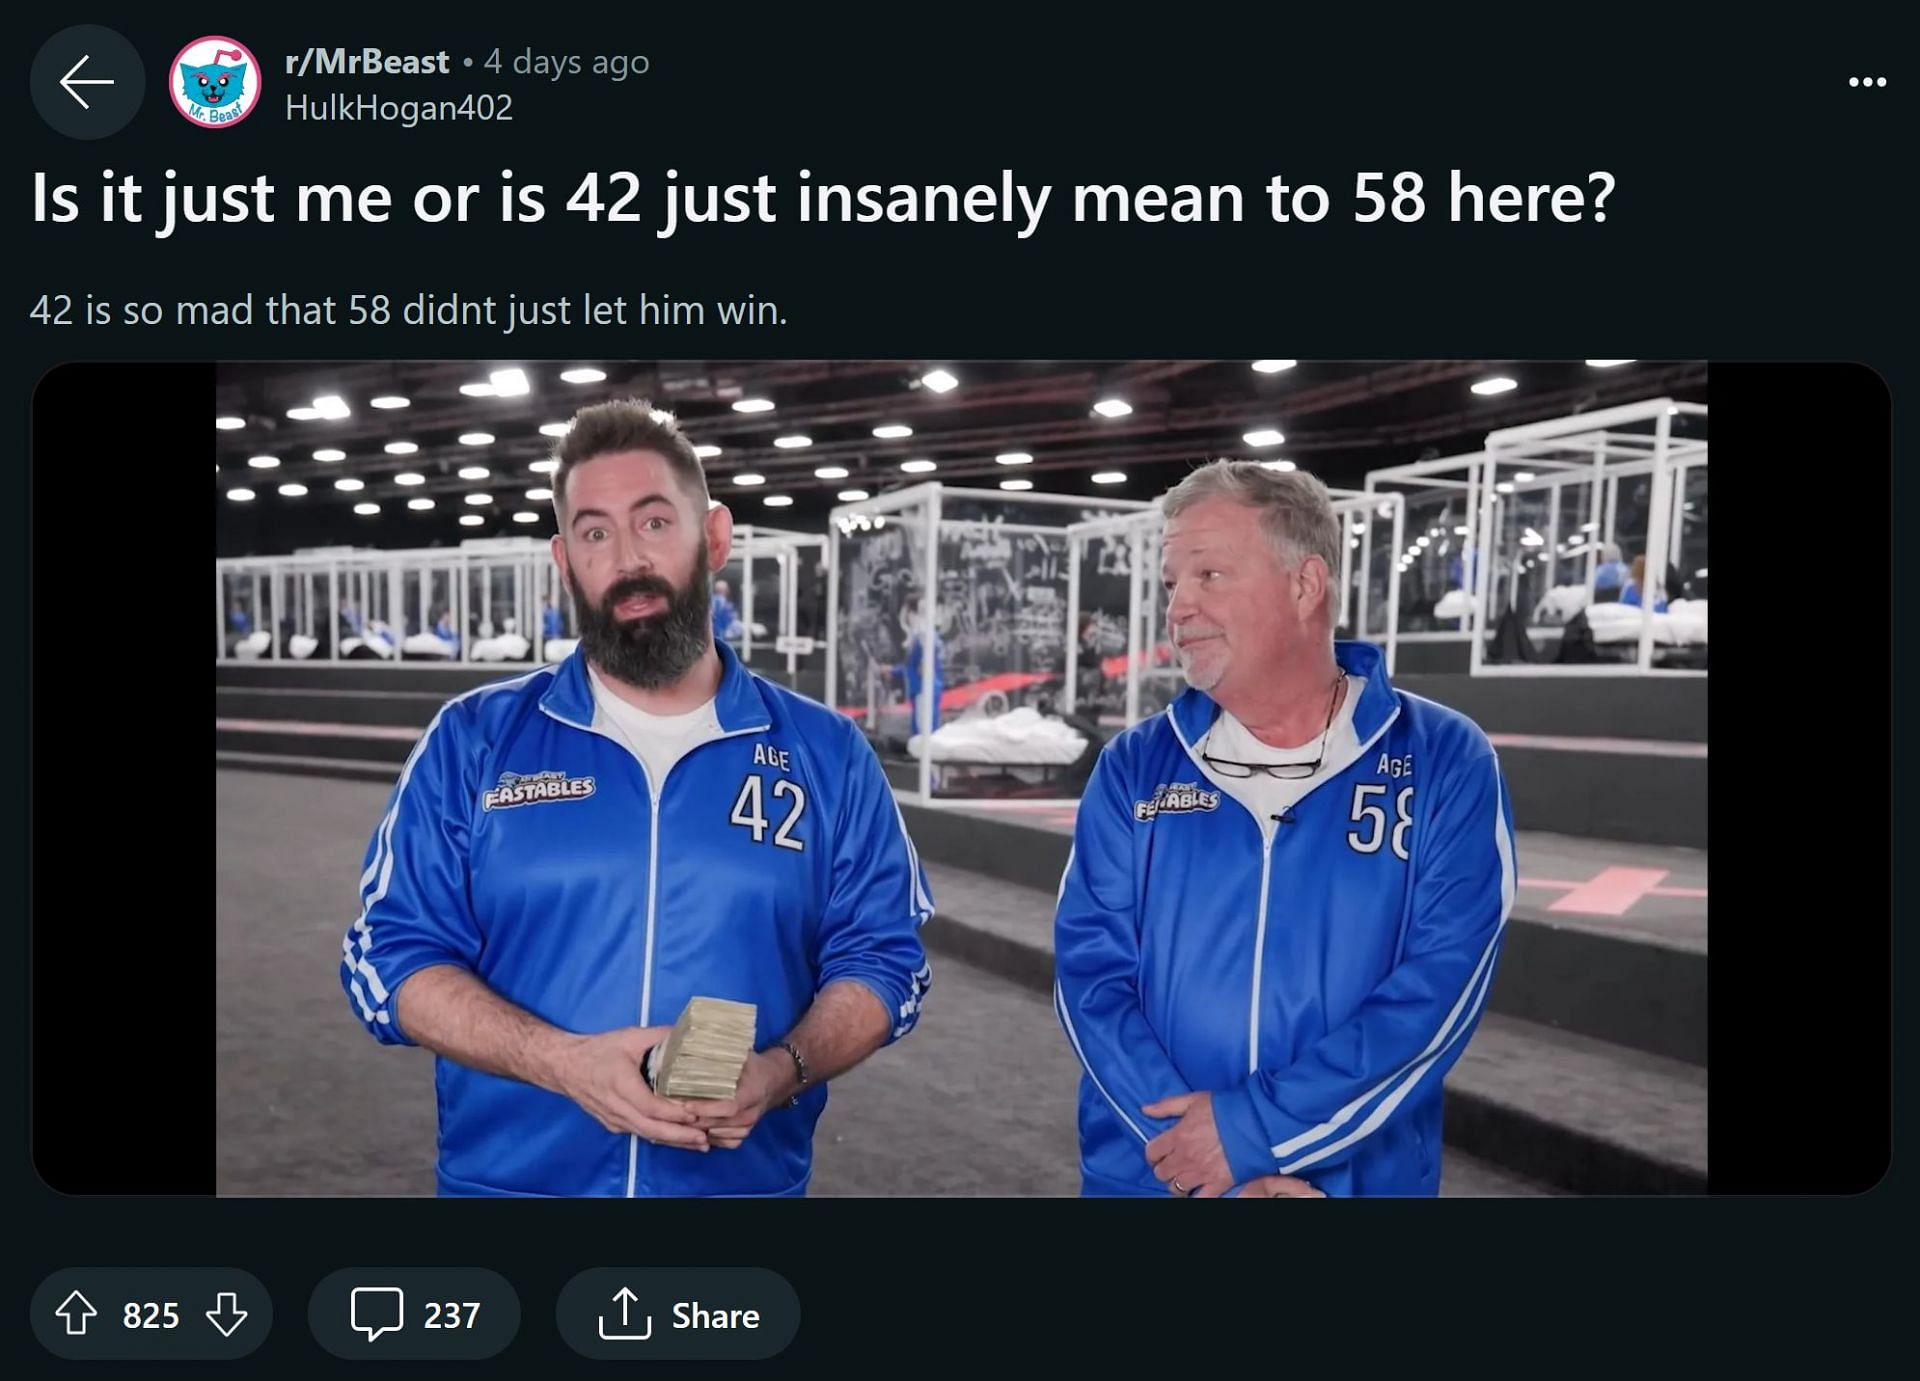 Redditor u/HulkHogan402 believed #42 was &quot;insanely mean&quot; to #58 in the MrBeast video (Image via Reddit)